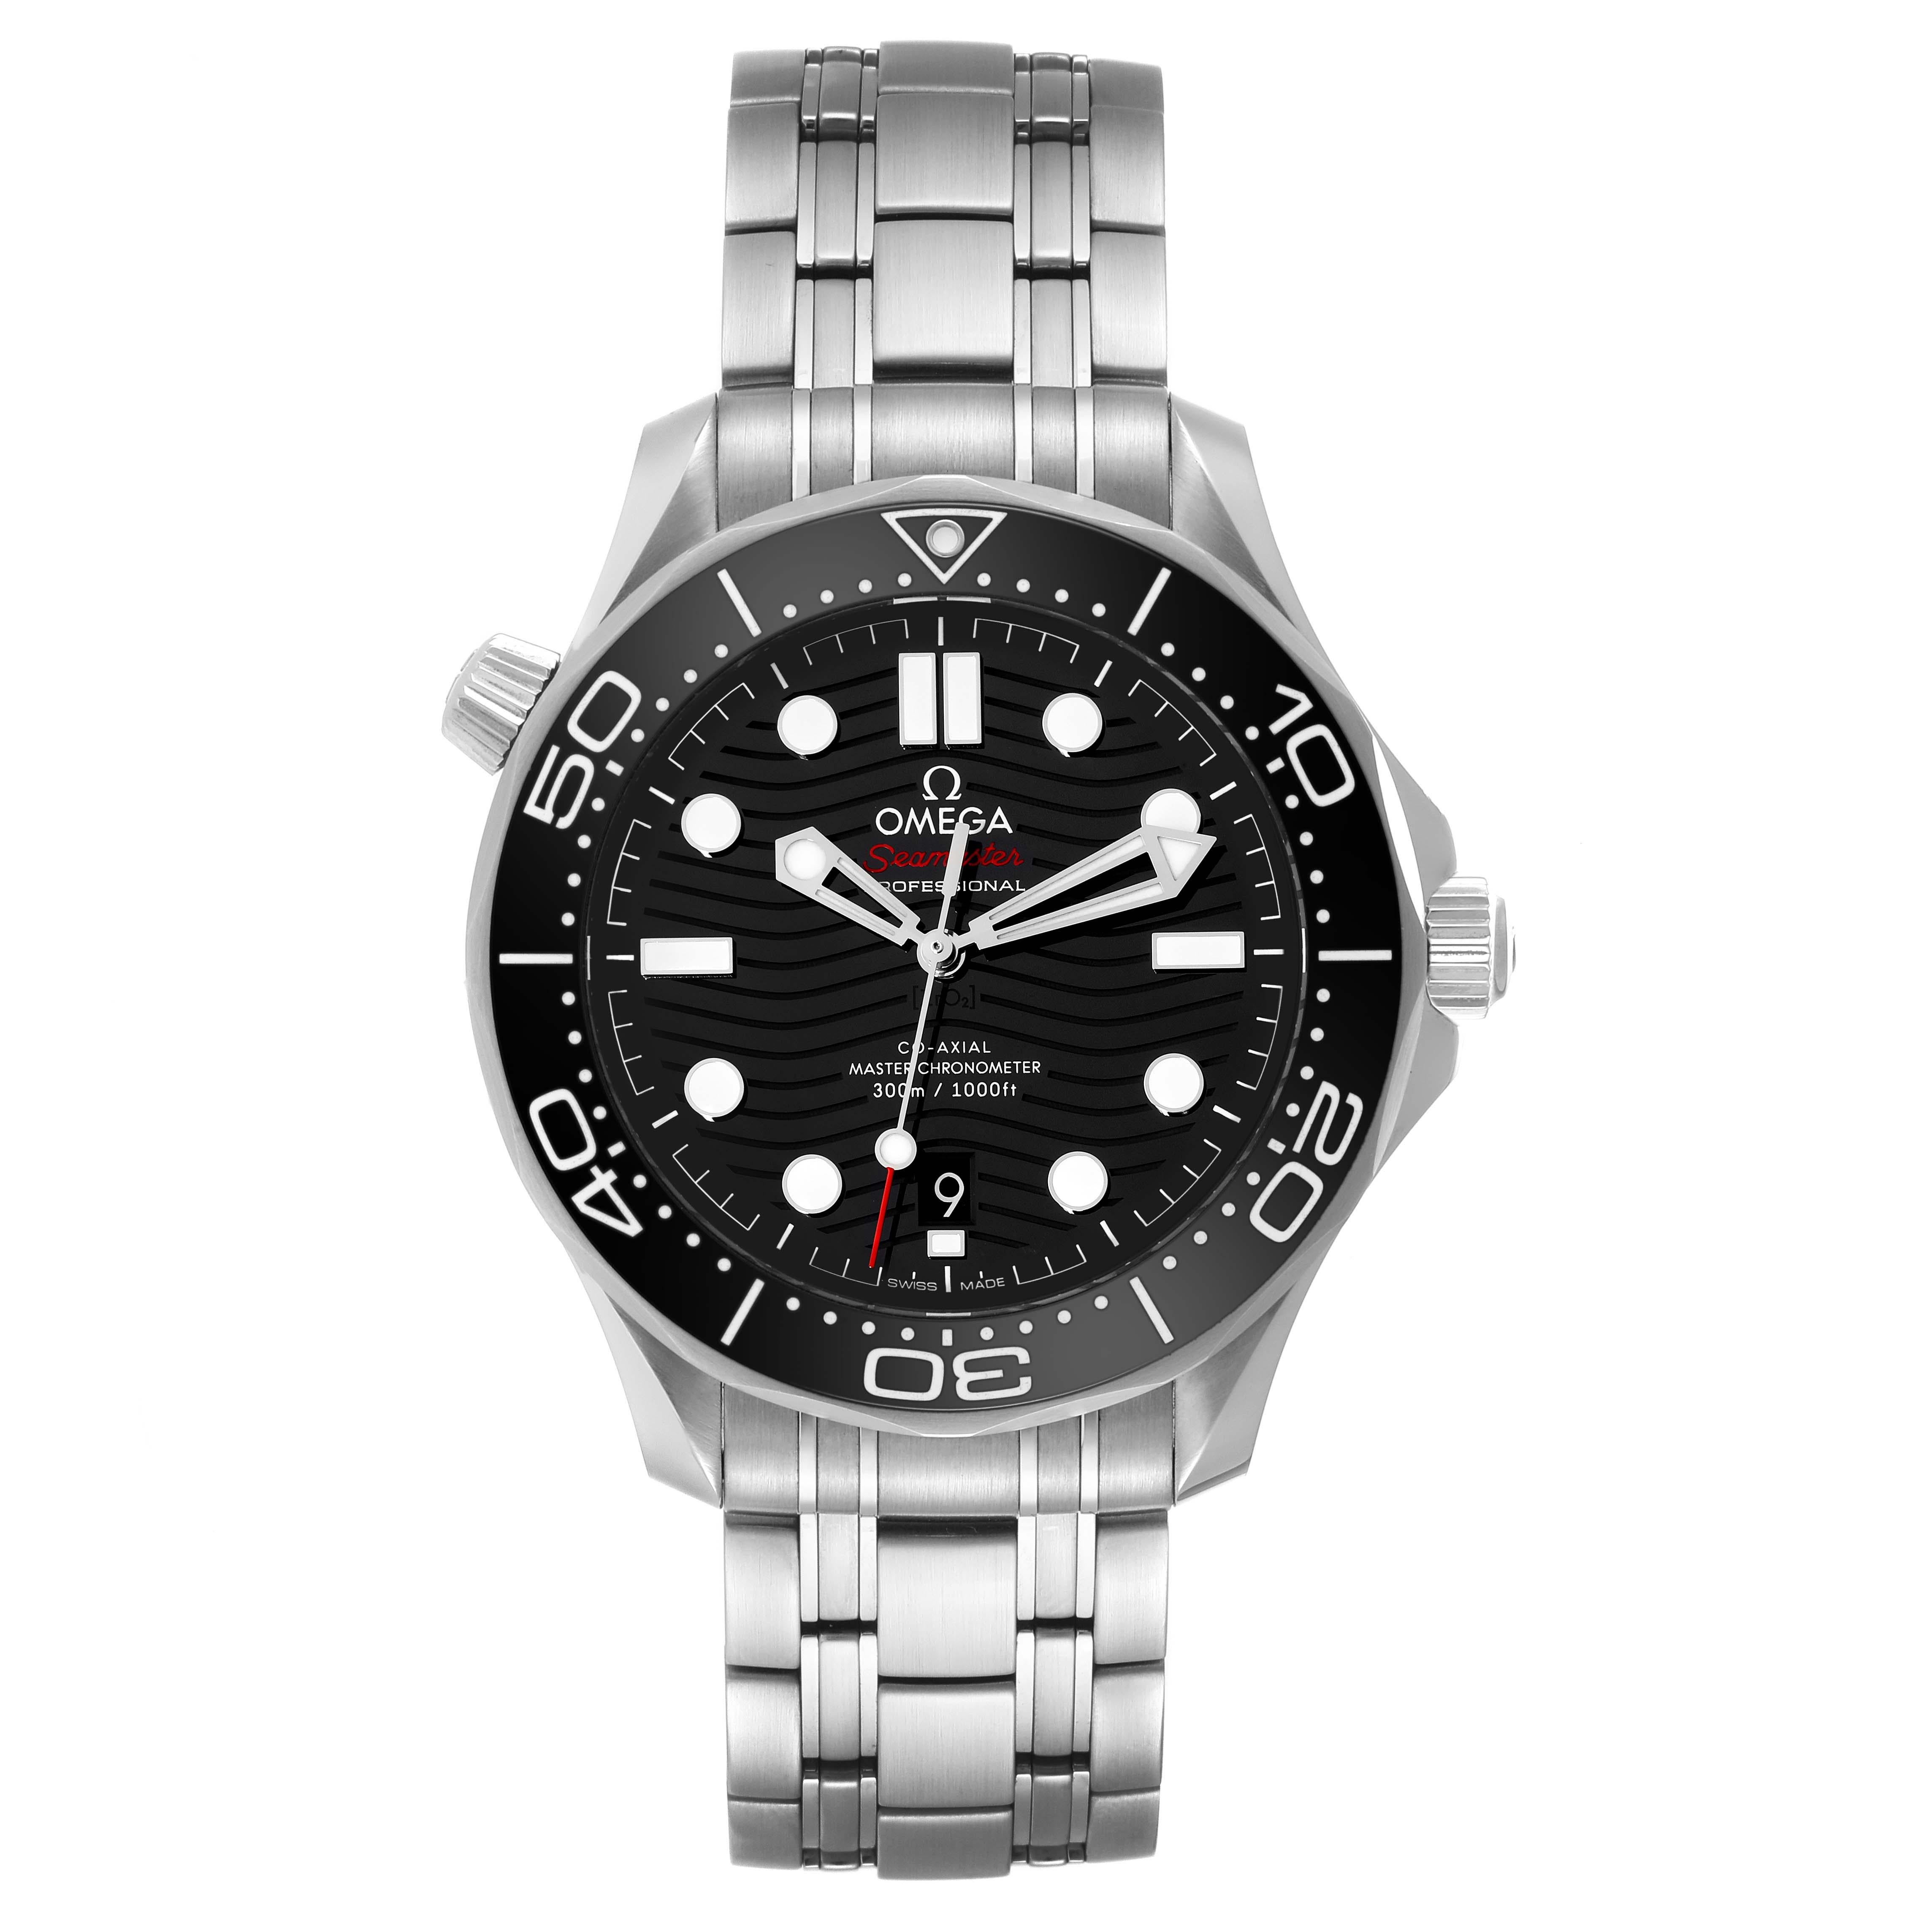 Omega Seamaster Diver 300M Steel Mens Watch 210.30.42.20.01.001 Box Card. Automatic self-winding movement with Co-Axial escapement. Certified Master Chronometer, approved by METAS, resistant to magnetic fields reaching 15,000 gauss. Free